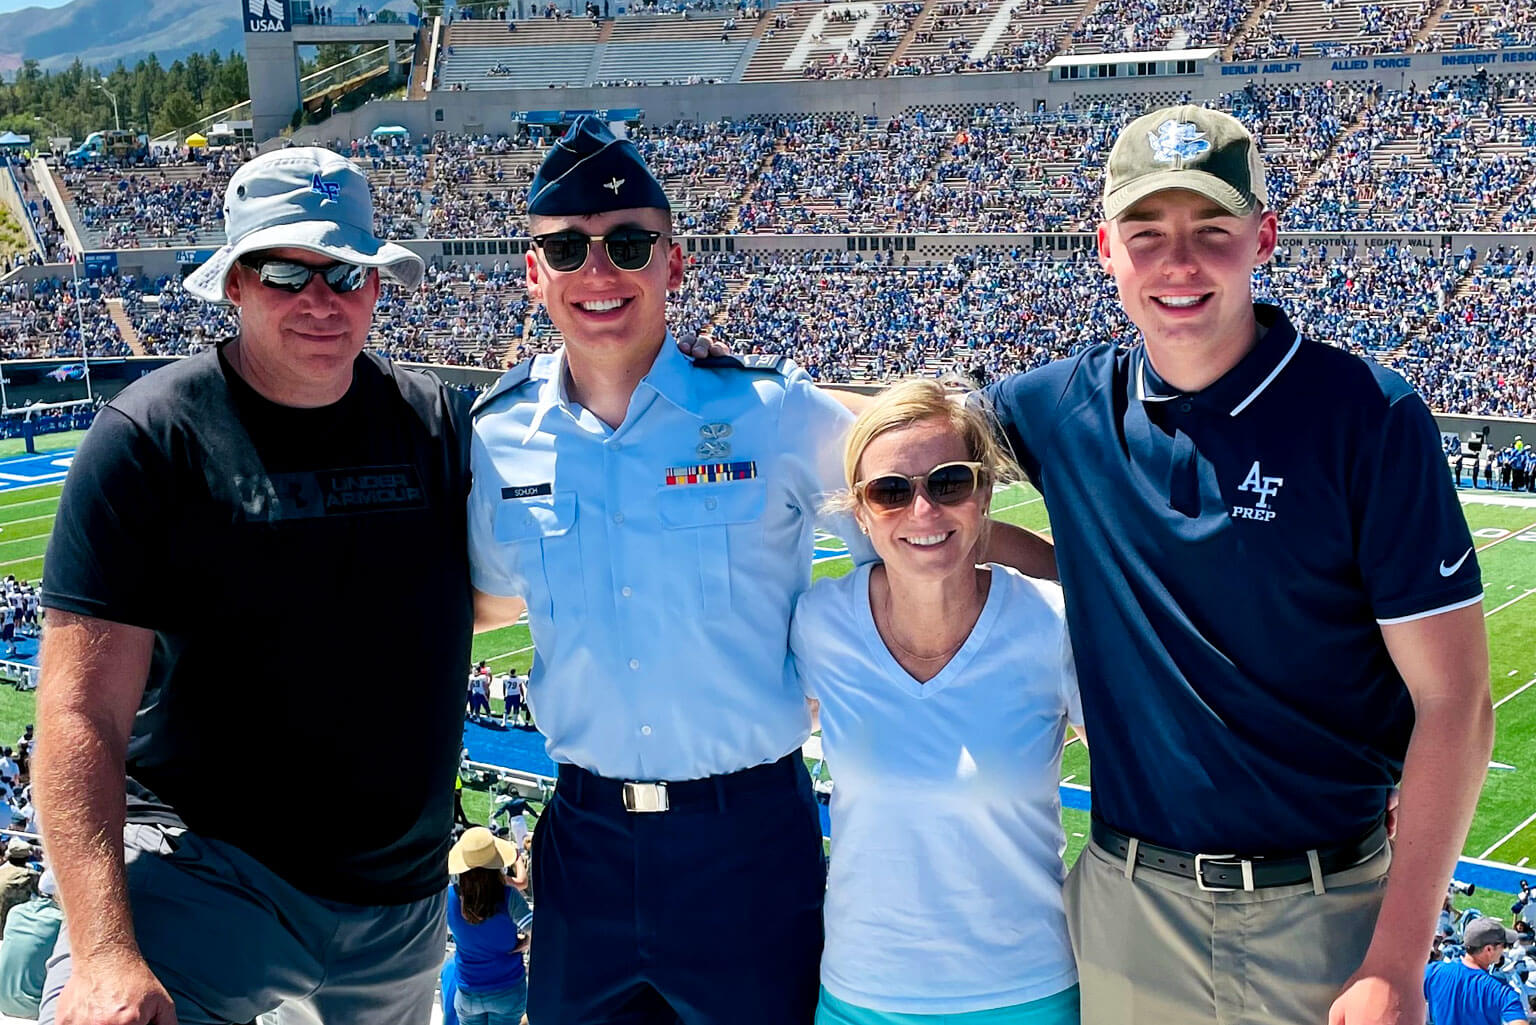 Chad Schuch and Maria Schuch pose with their sons, Cadet 4th Class Chad Schuch Jr. and U.S. Air Force Academy Preparatory School Cadet Candidate Dylan Schuch.